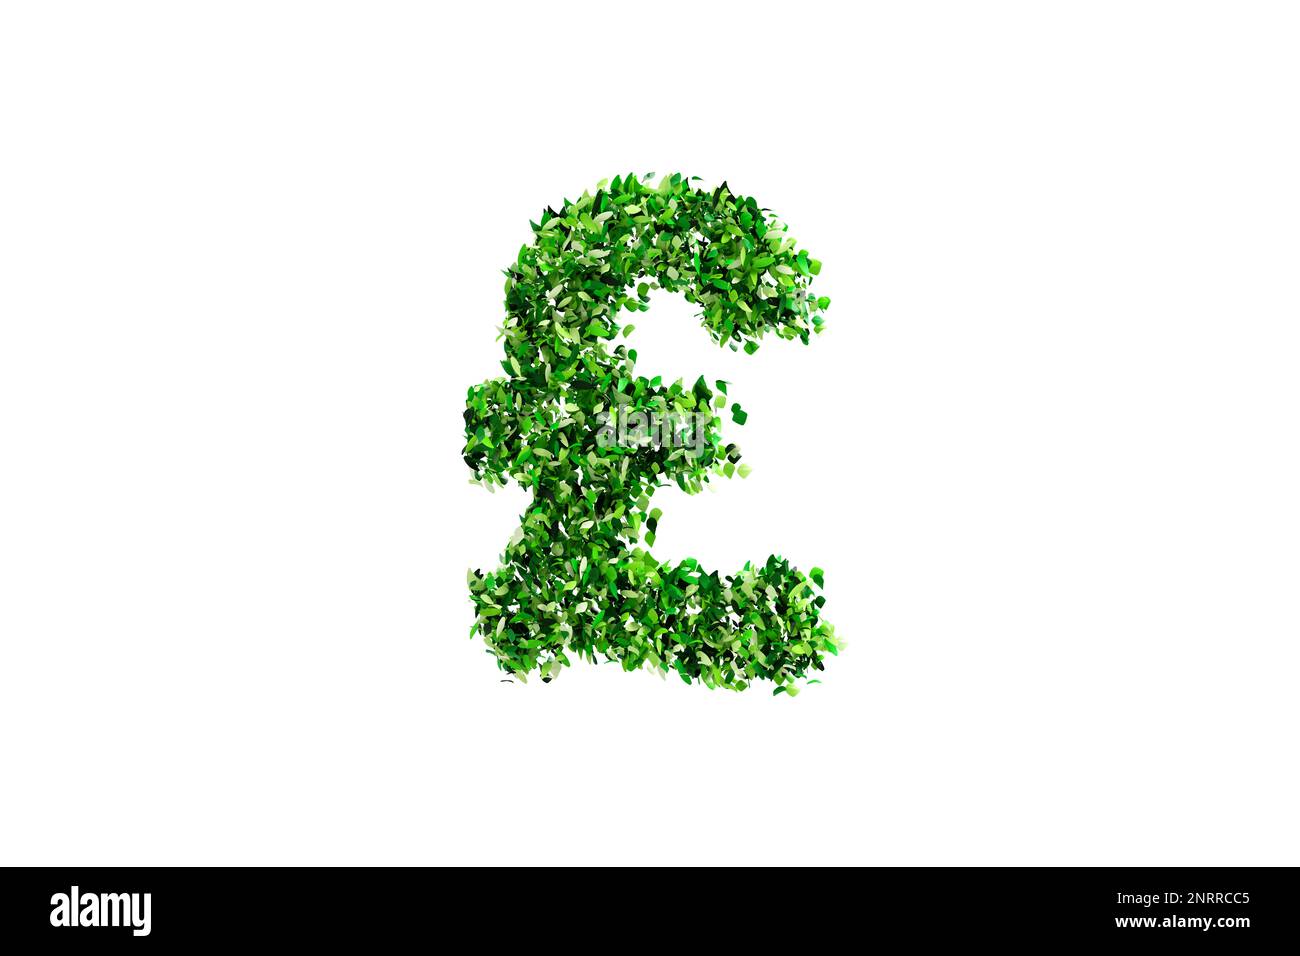 British pound sign made of leaves isolated on white background Stock Photo